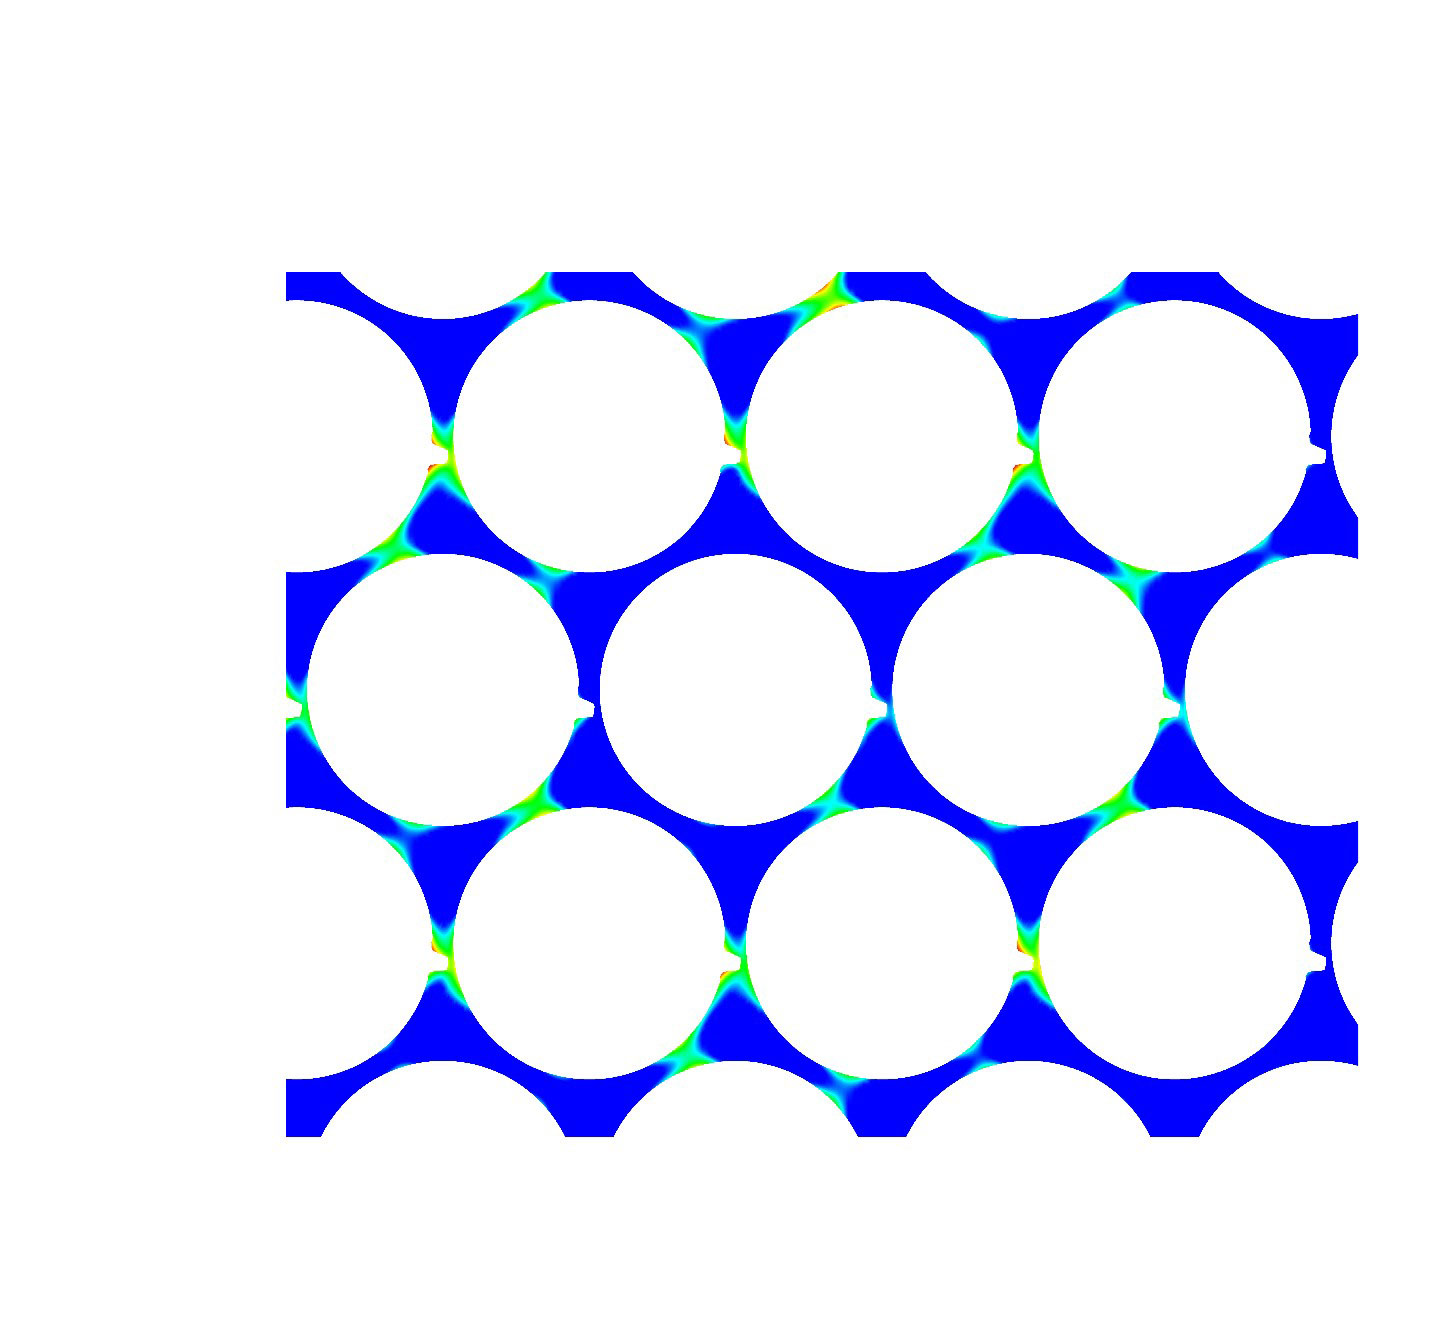 White circles on a blue background with green connective line grid